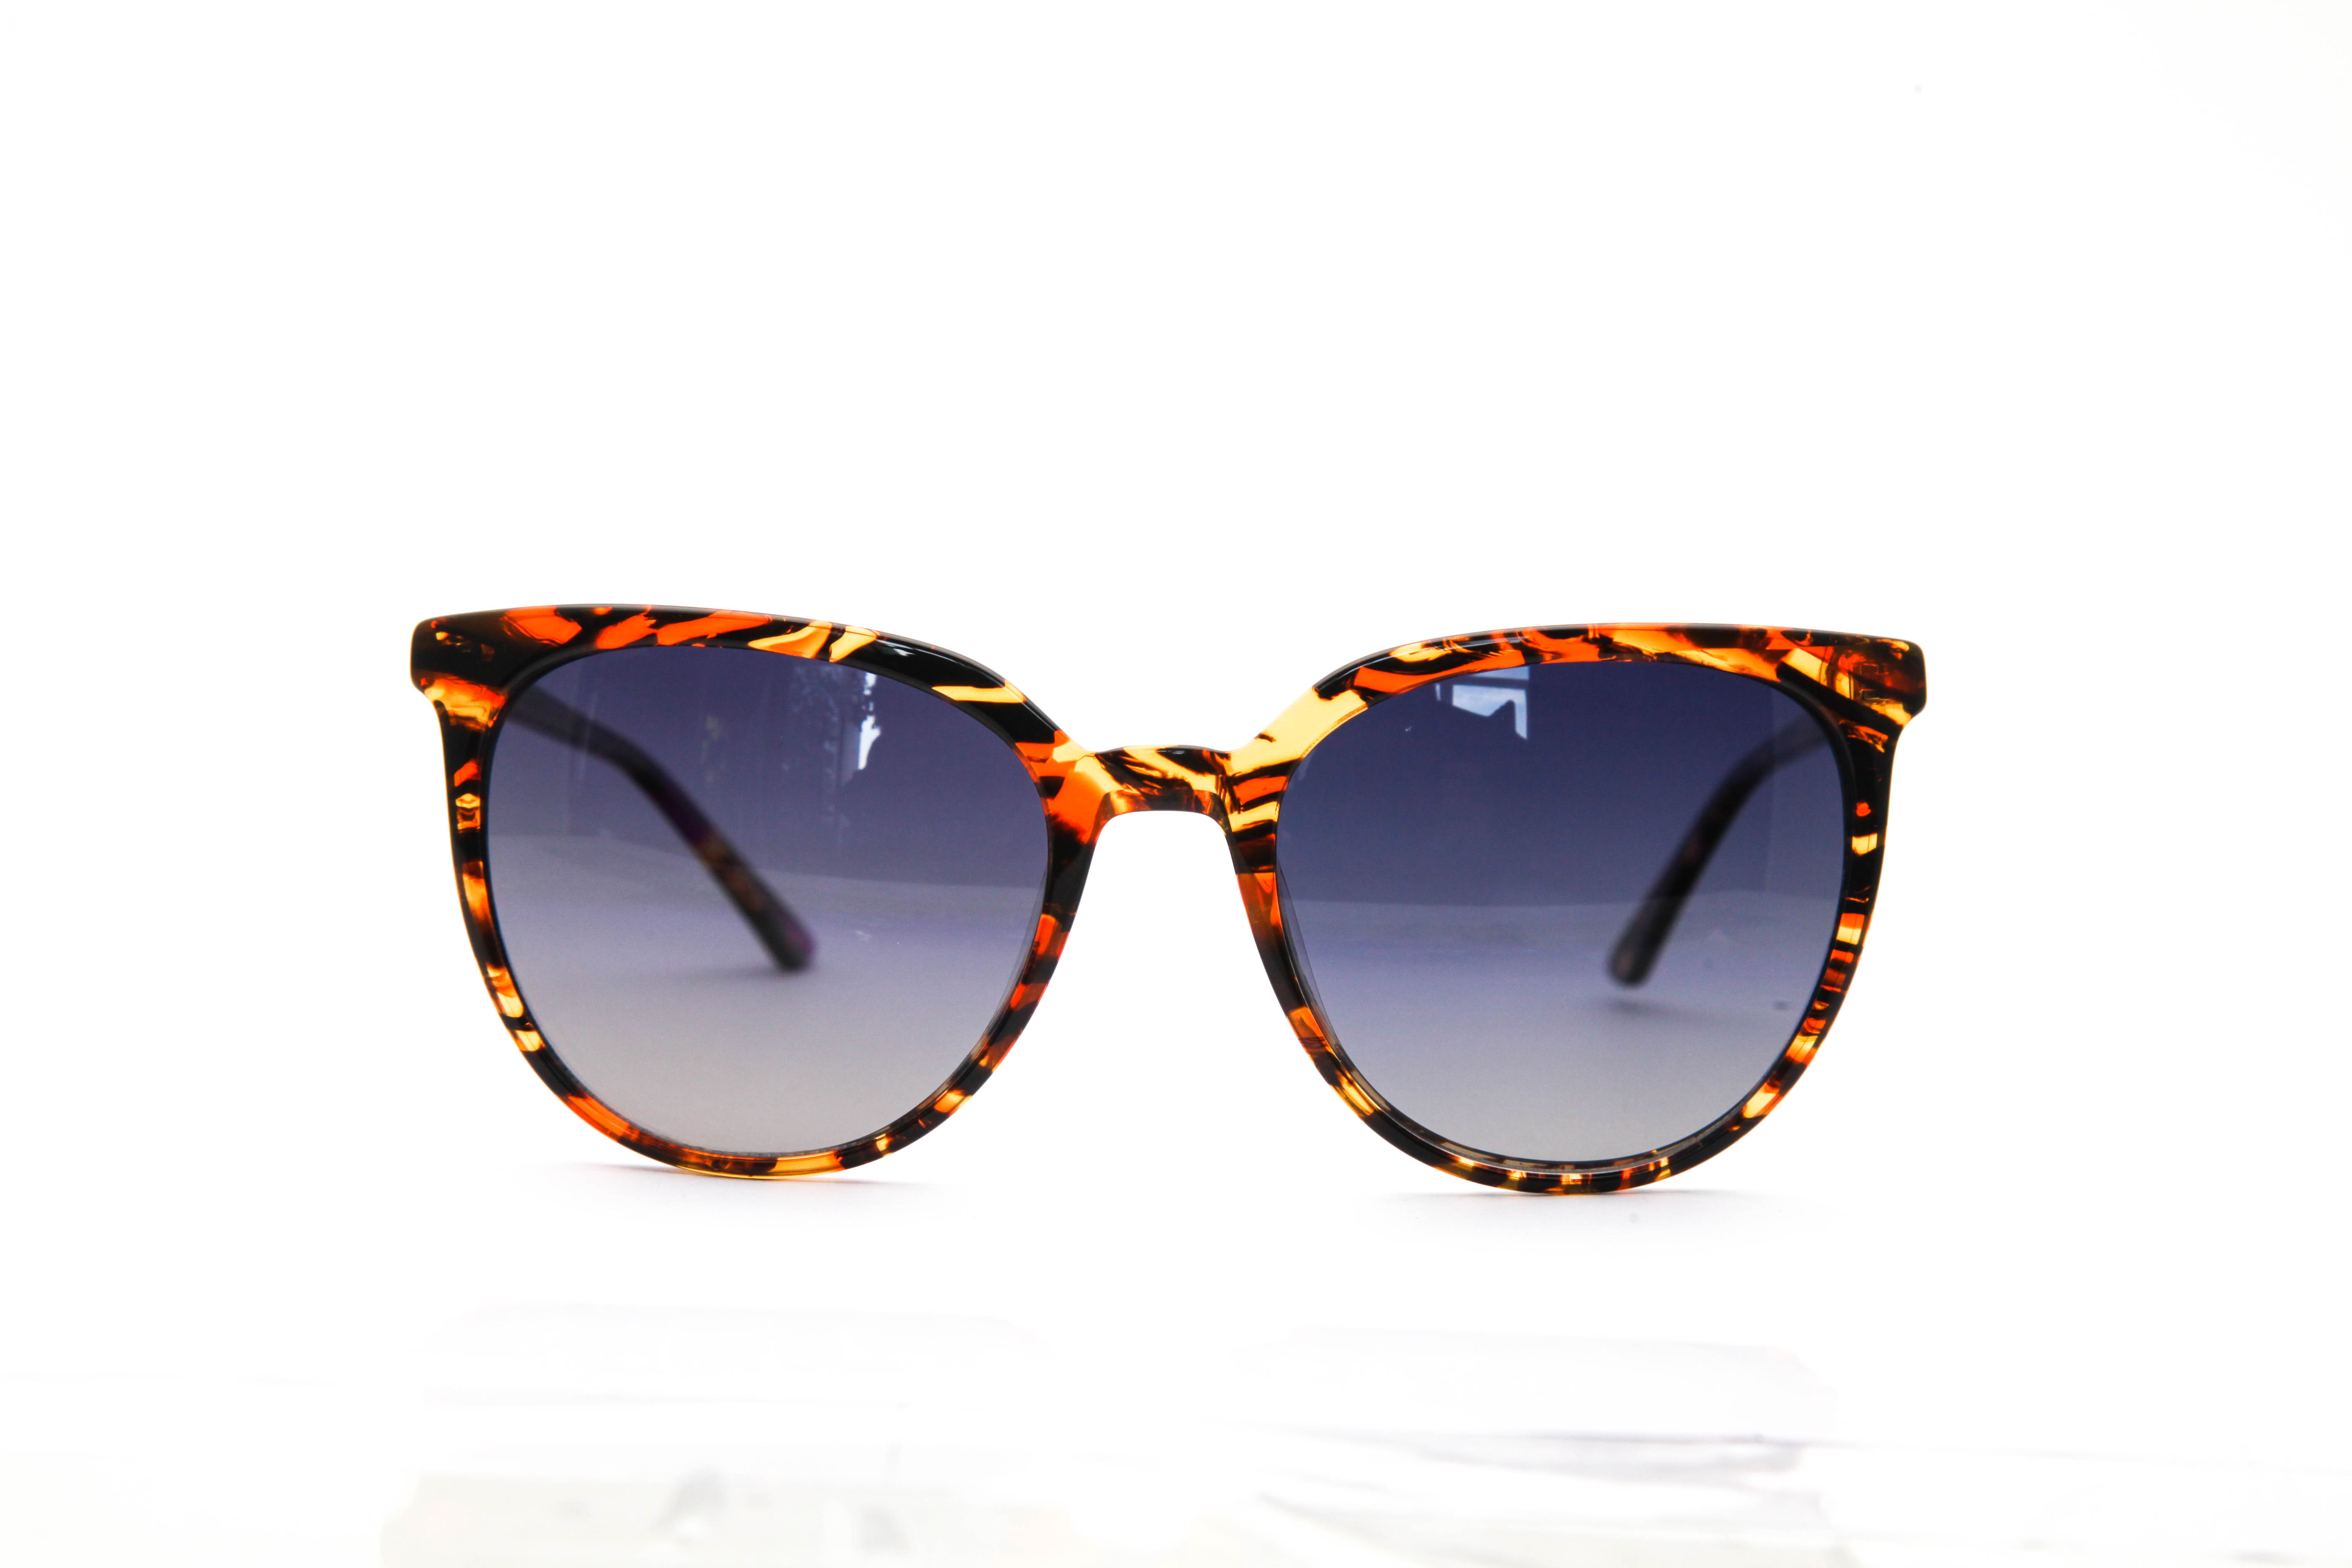 Introducing our latest collection of acetate sunglasses.